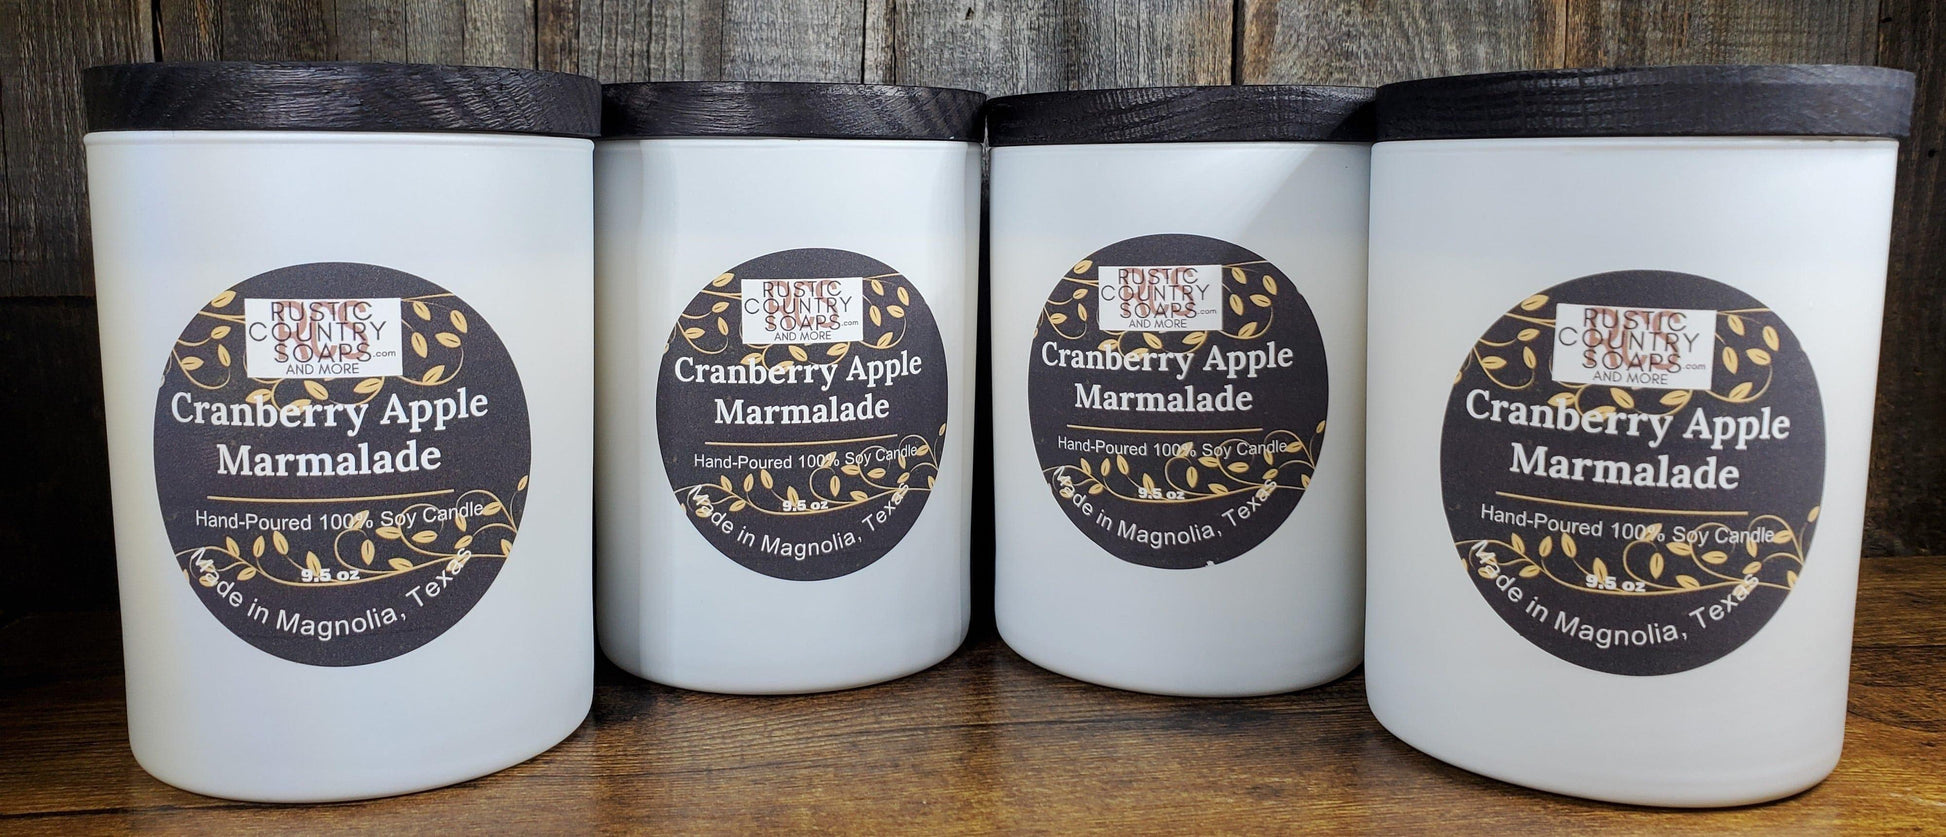 Cranberry Apple Marmalade Soy Candle - Rustic Country Soaps & More